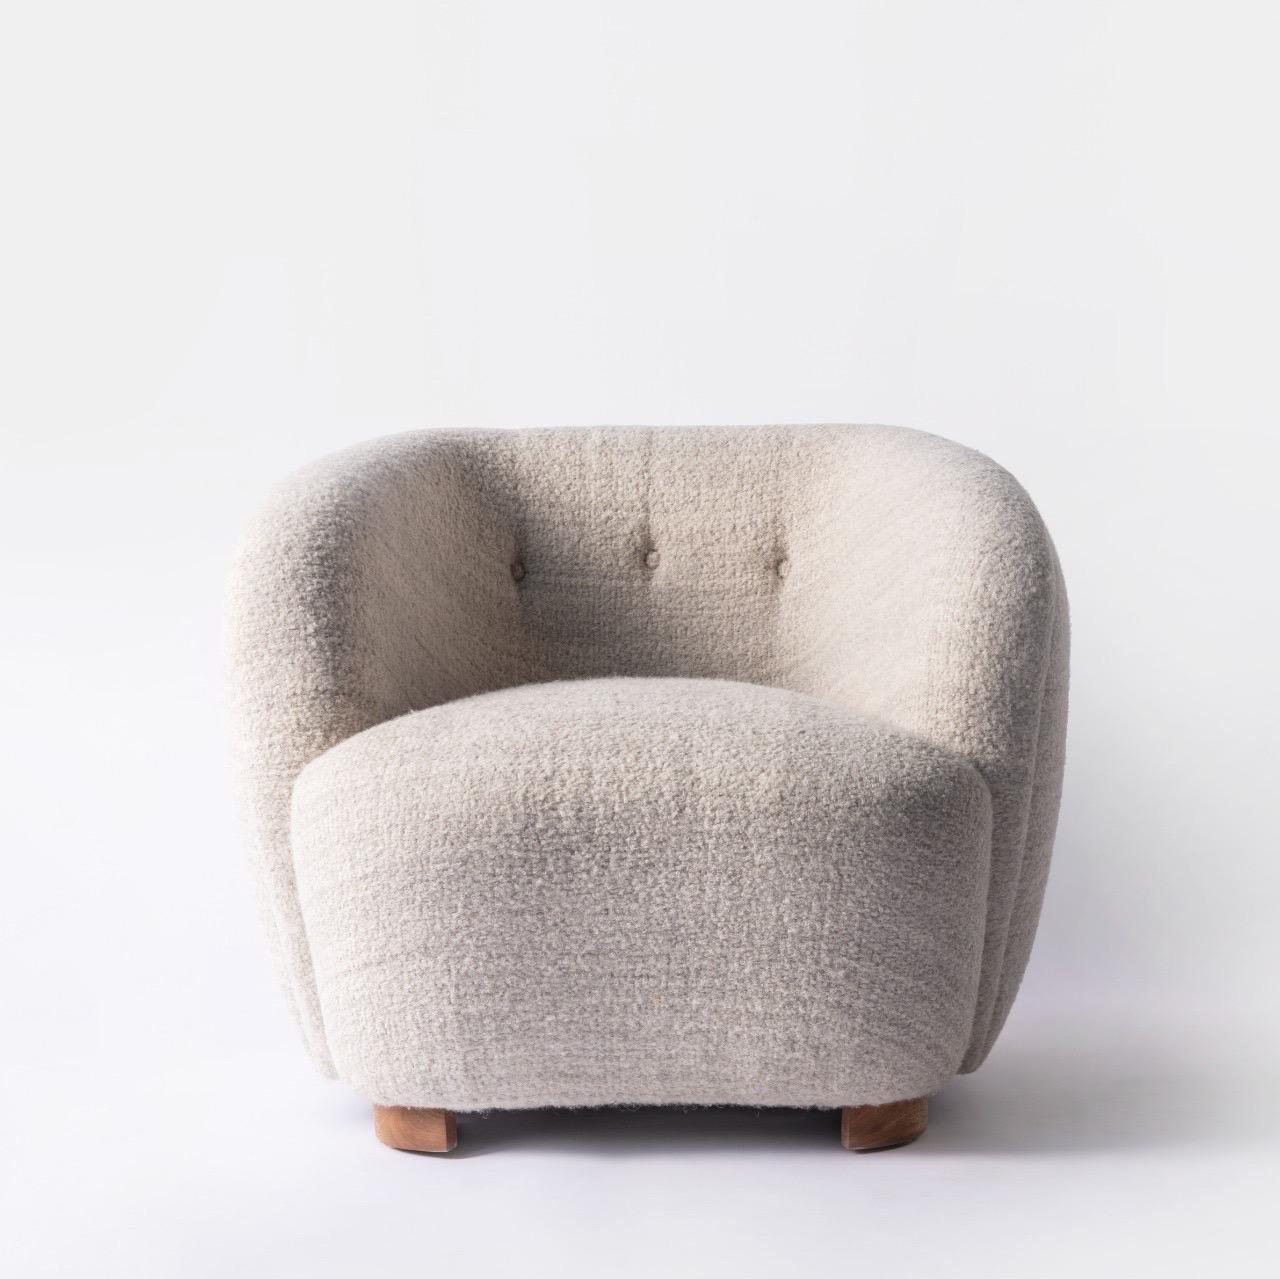 Made in Mexico by Mixma by our artisans trained in traditional French upholstery techniques. Every curve and detail is meticulously hand-sewn to bring this design to life. A true statement piece for the connoisseur in the know.